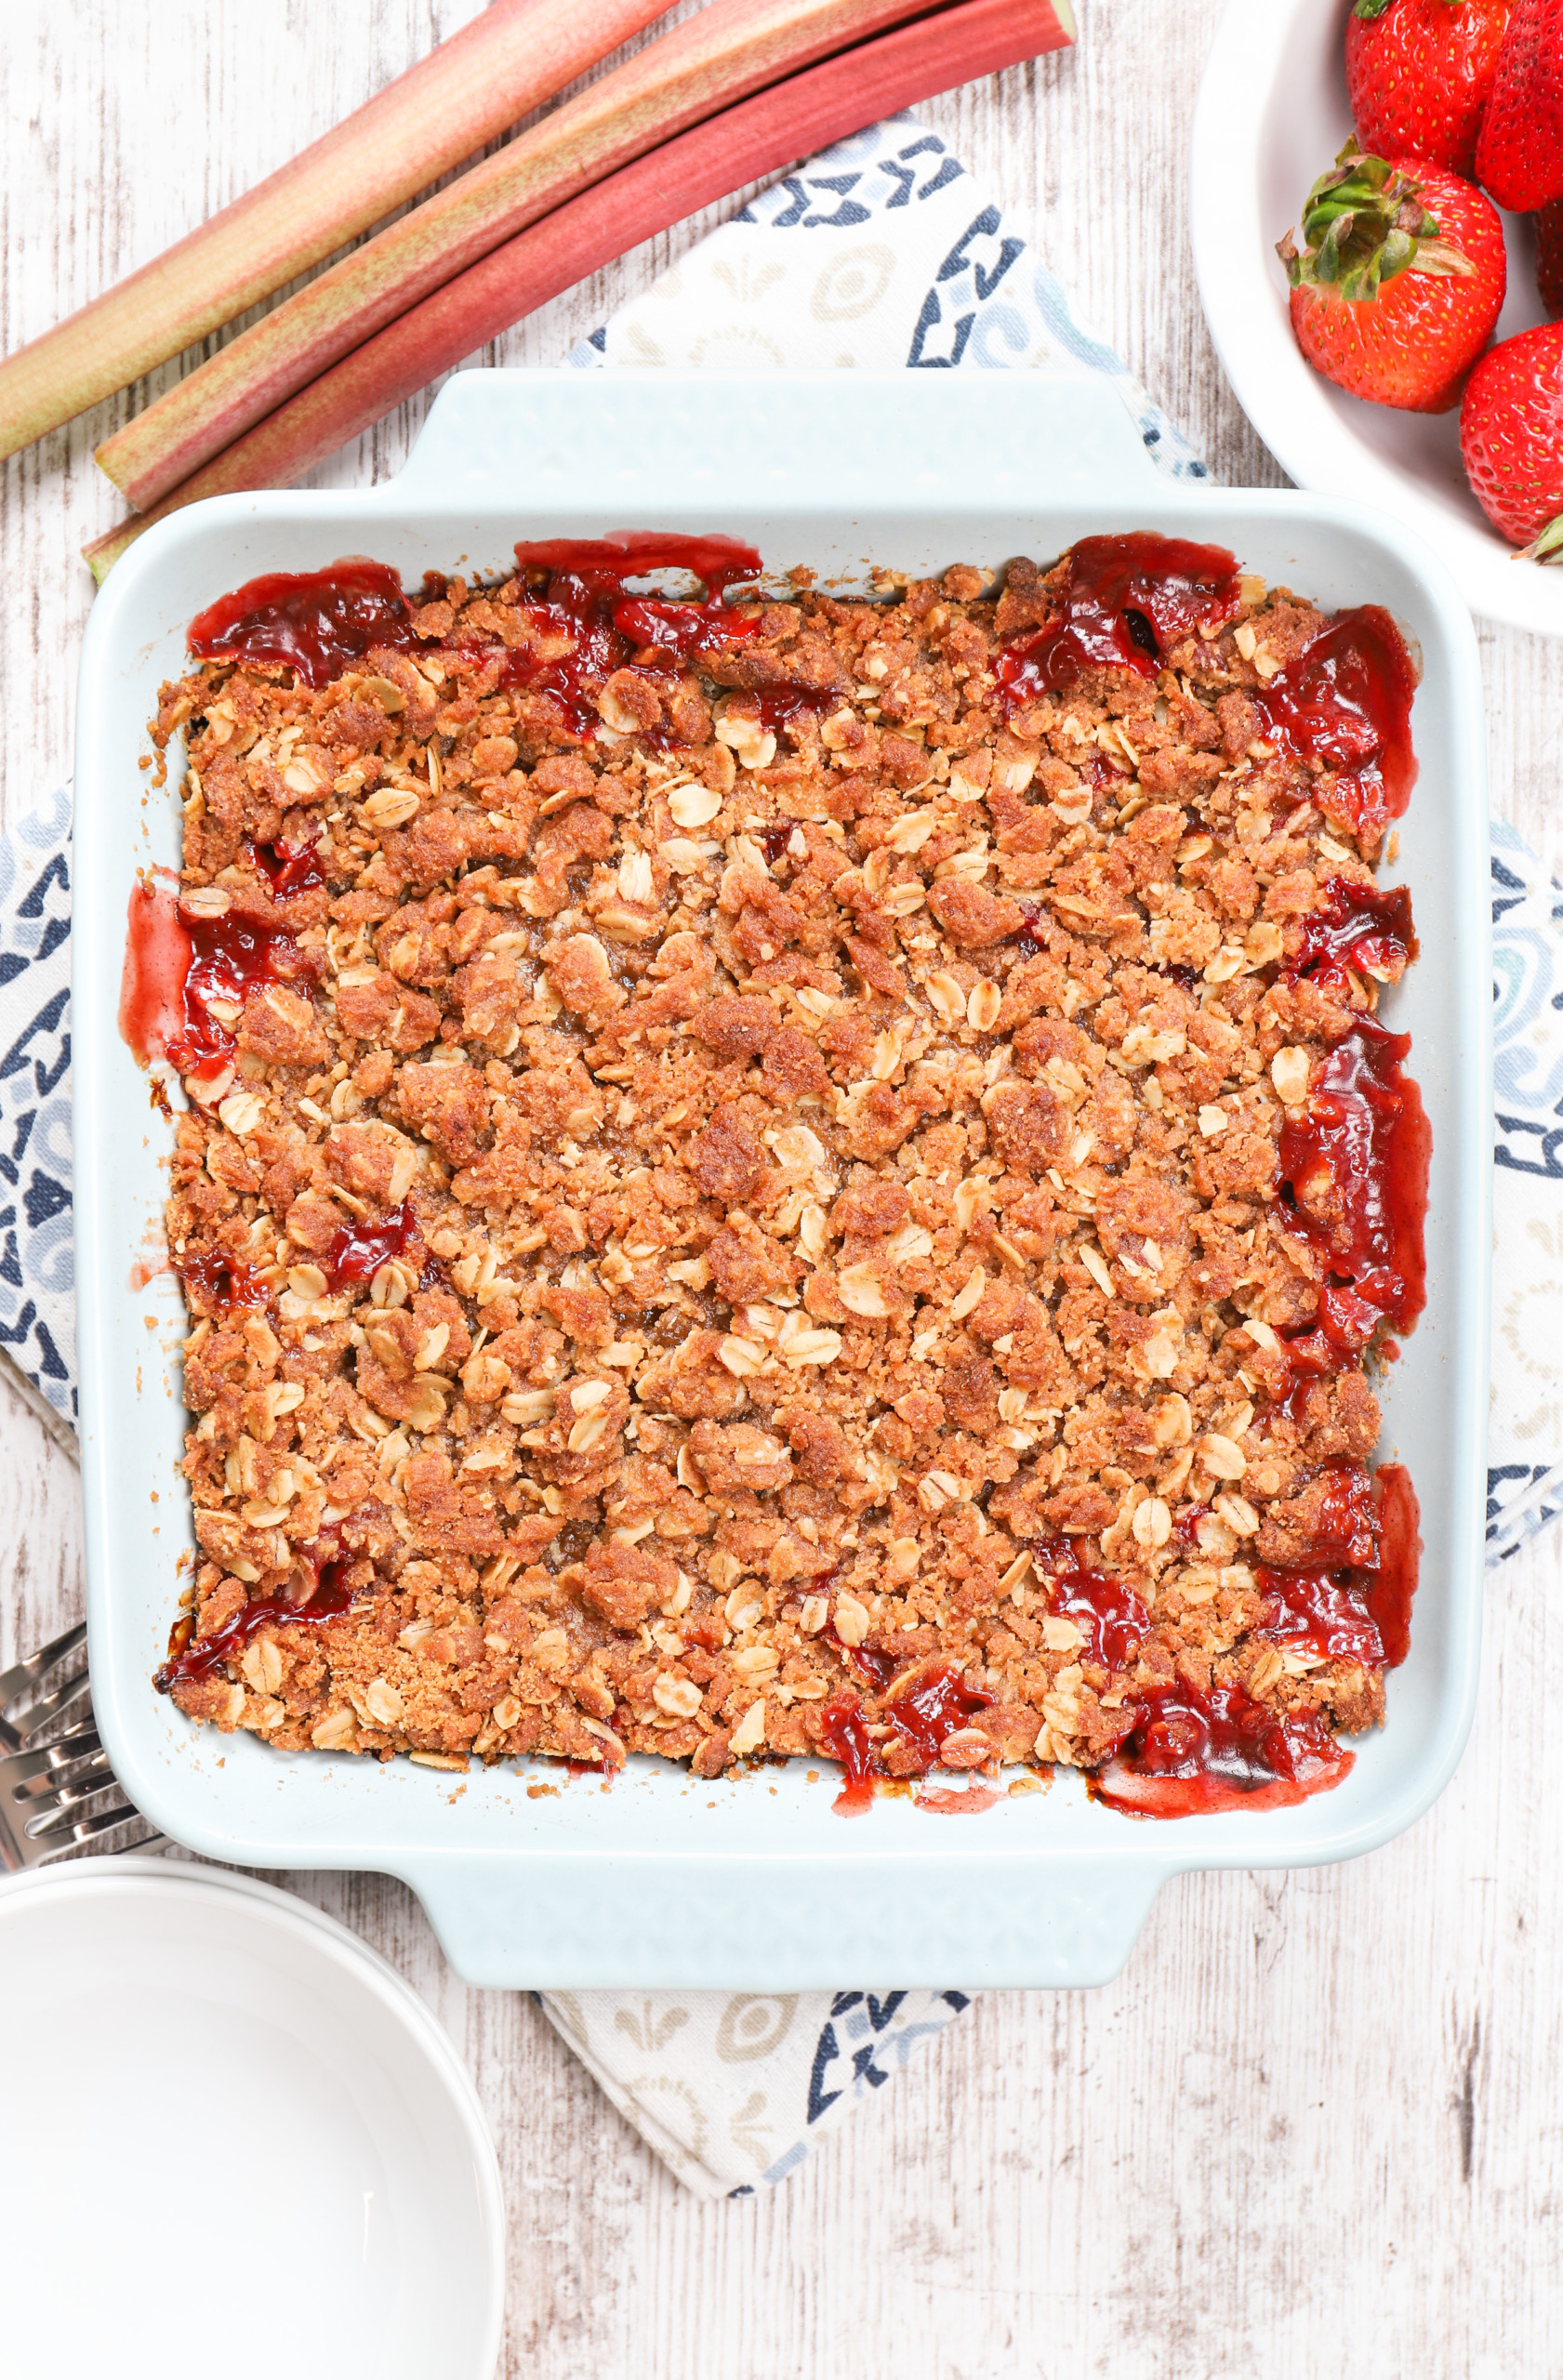 Overhead view of a dish of strawberry rhubarb crisp right out of the oven.